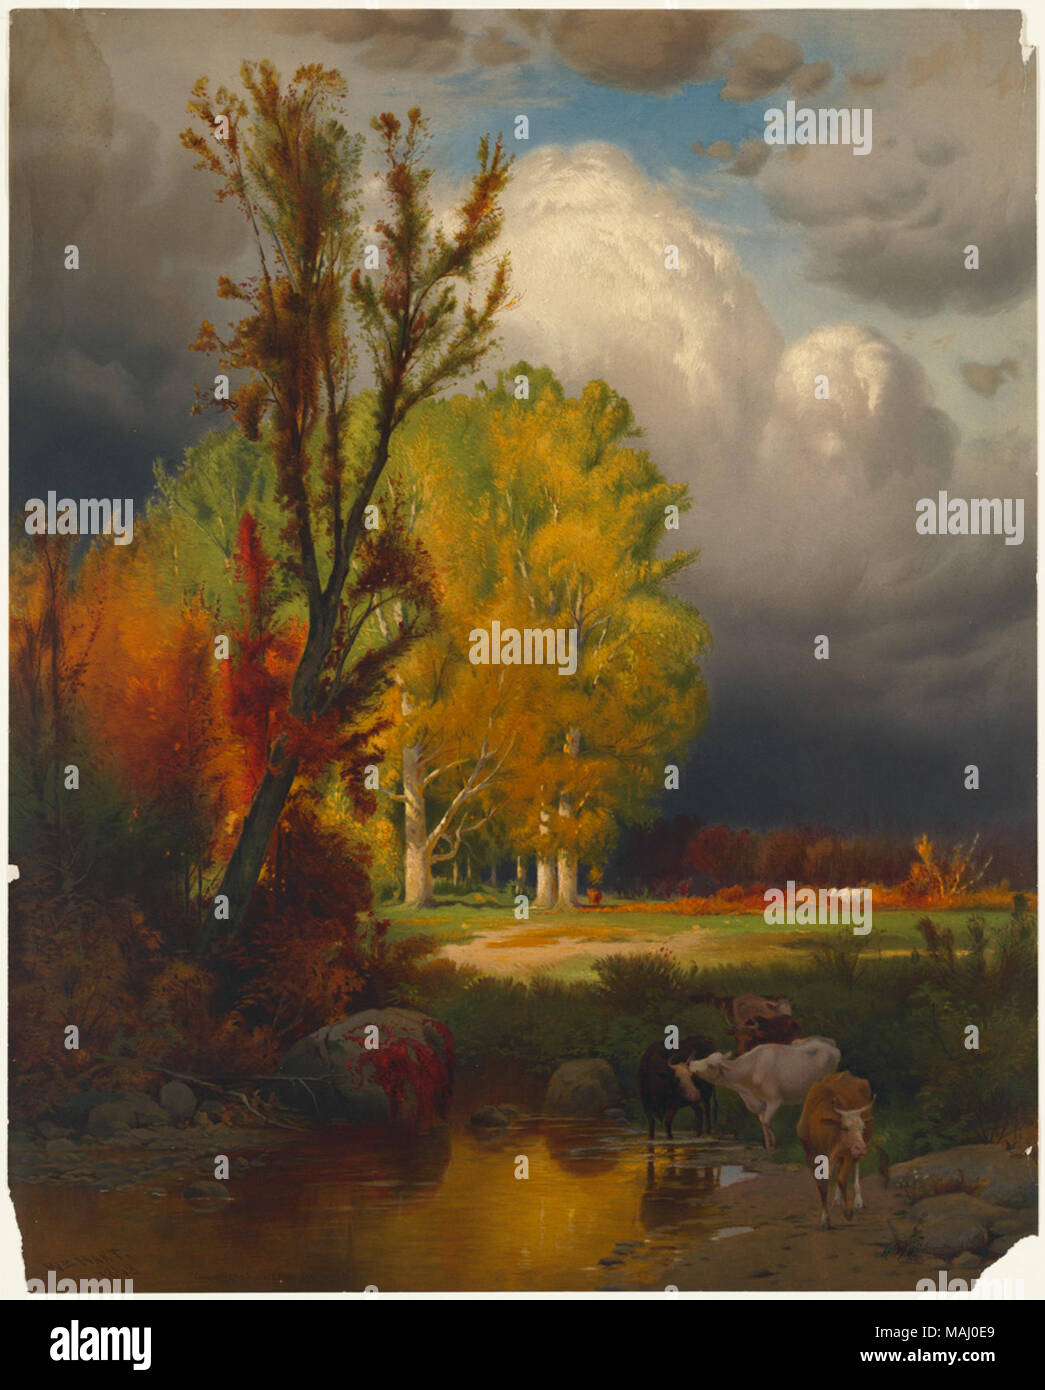 File name: 07 11 001423 Title: The Joy of Autumn Creator/Contributor: Hart, William, 1823-1894 (artist); L. Prang & Co. (publisher) Date issued: 1861-1897 (approximate)  Physical description note: Genre: Chromolithographs; Landscape prints Location: Boston Public Library,    on 2011-08-03: Camera: Sinar AG Sinarback 54 FW, Sinar m Stock Photo